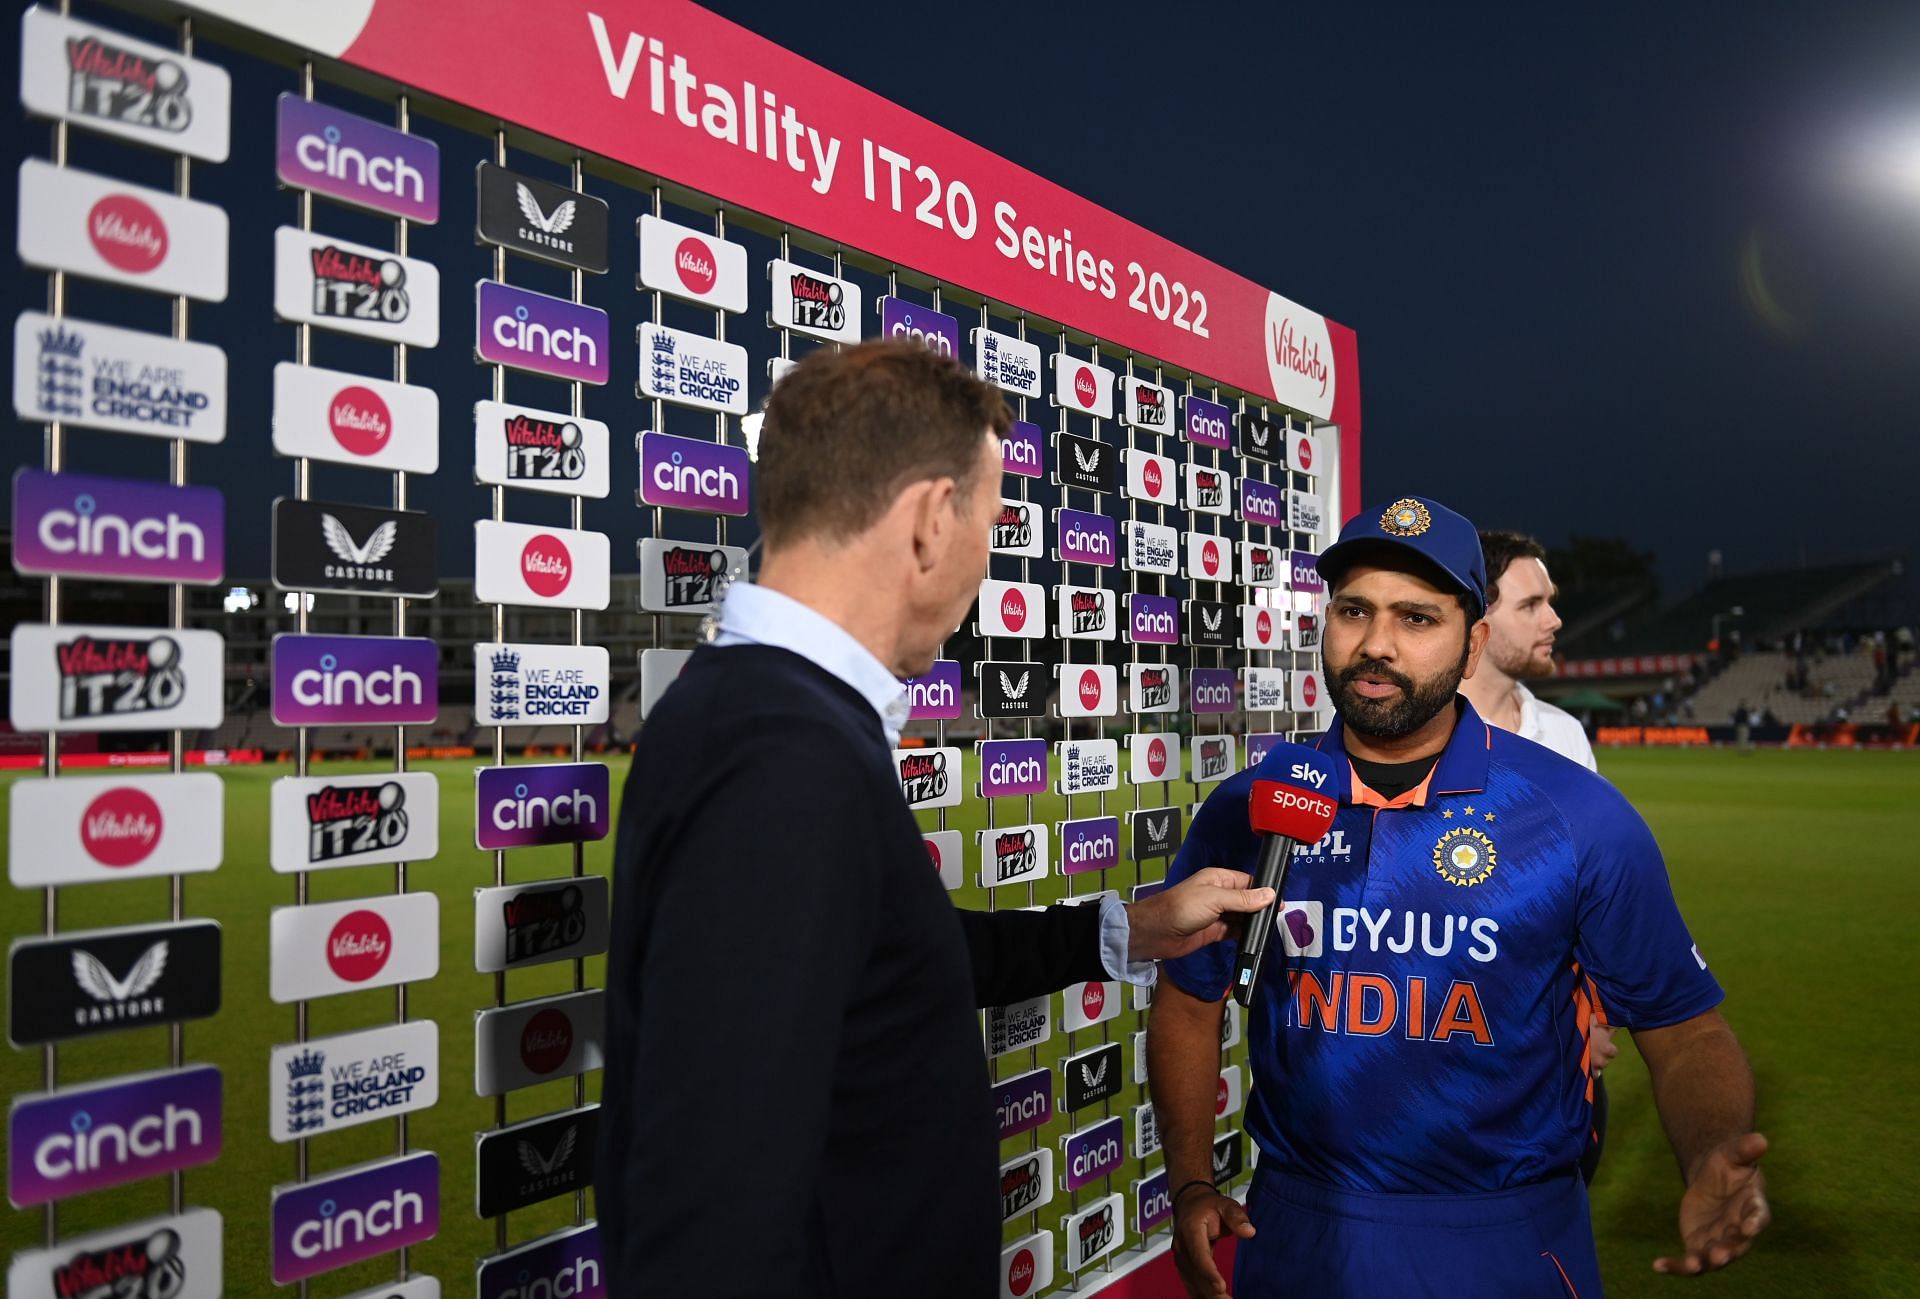 Rohit Sharma (R) is playing his 127th T20 international match in Birmingham on Saturday (Image Courtesy: Getty)